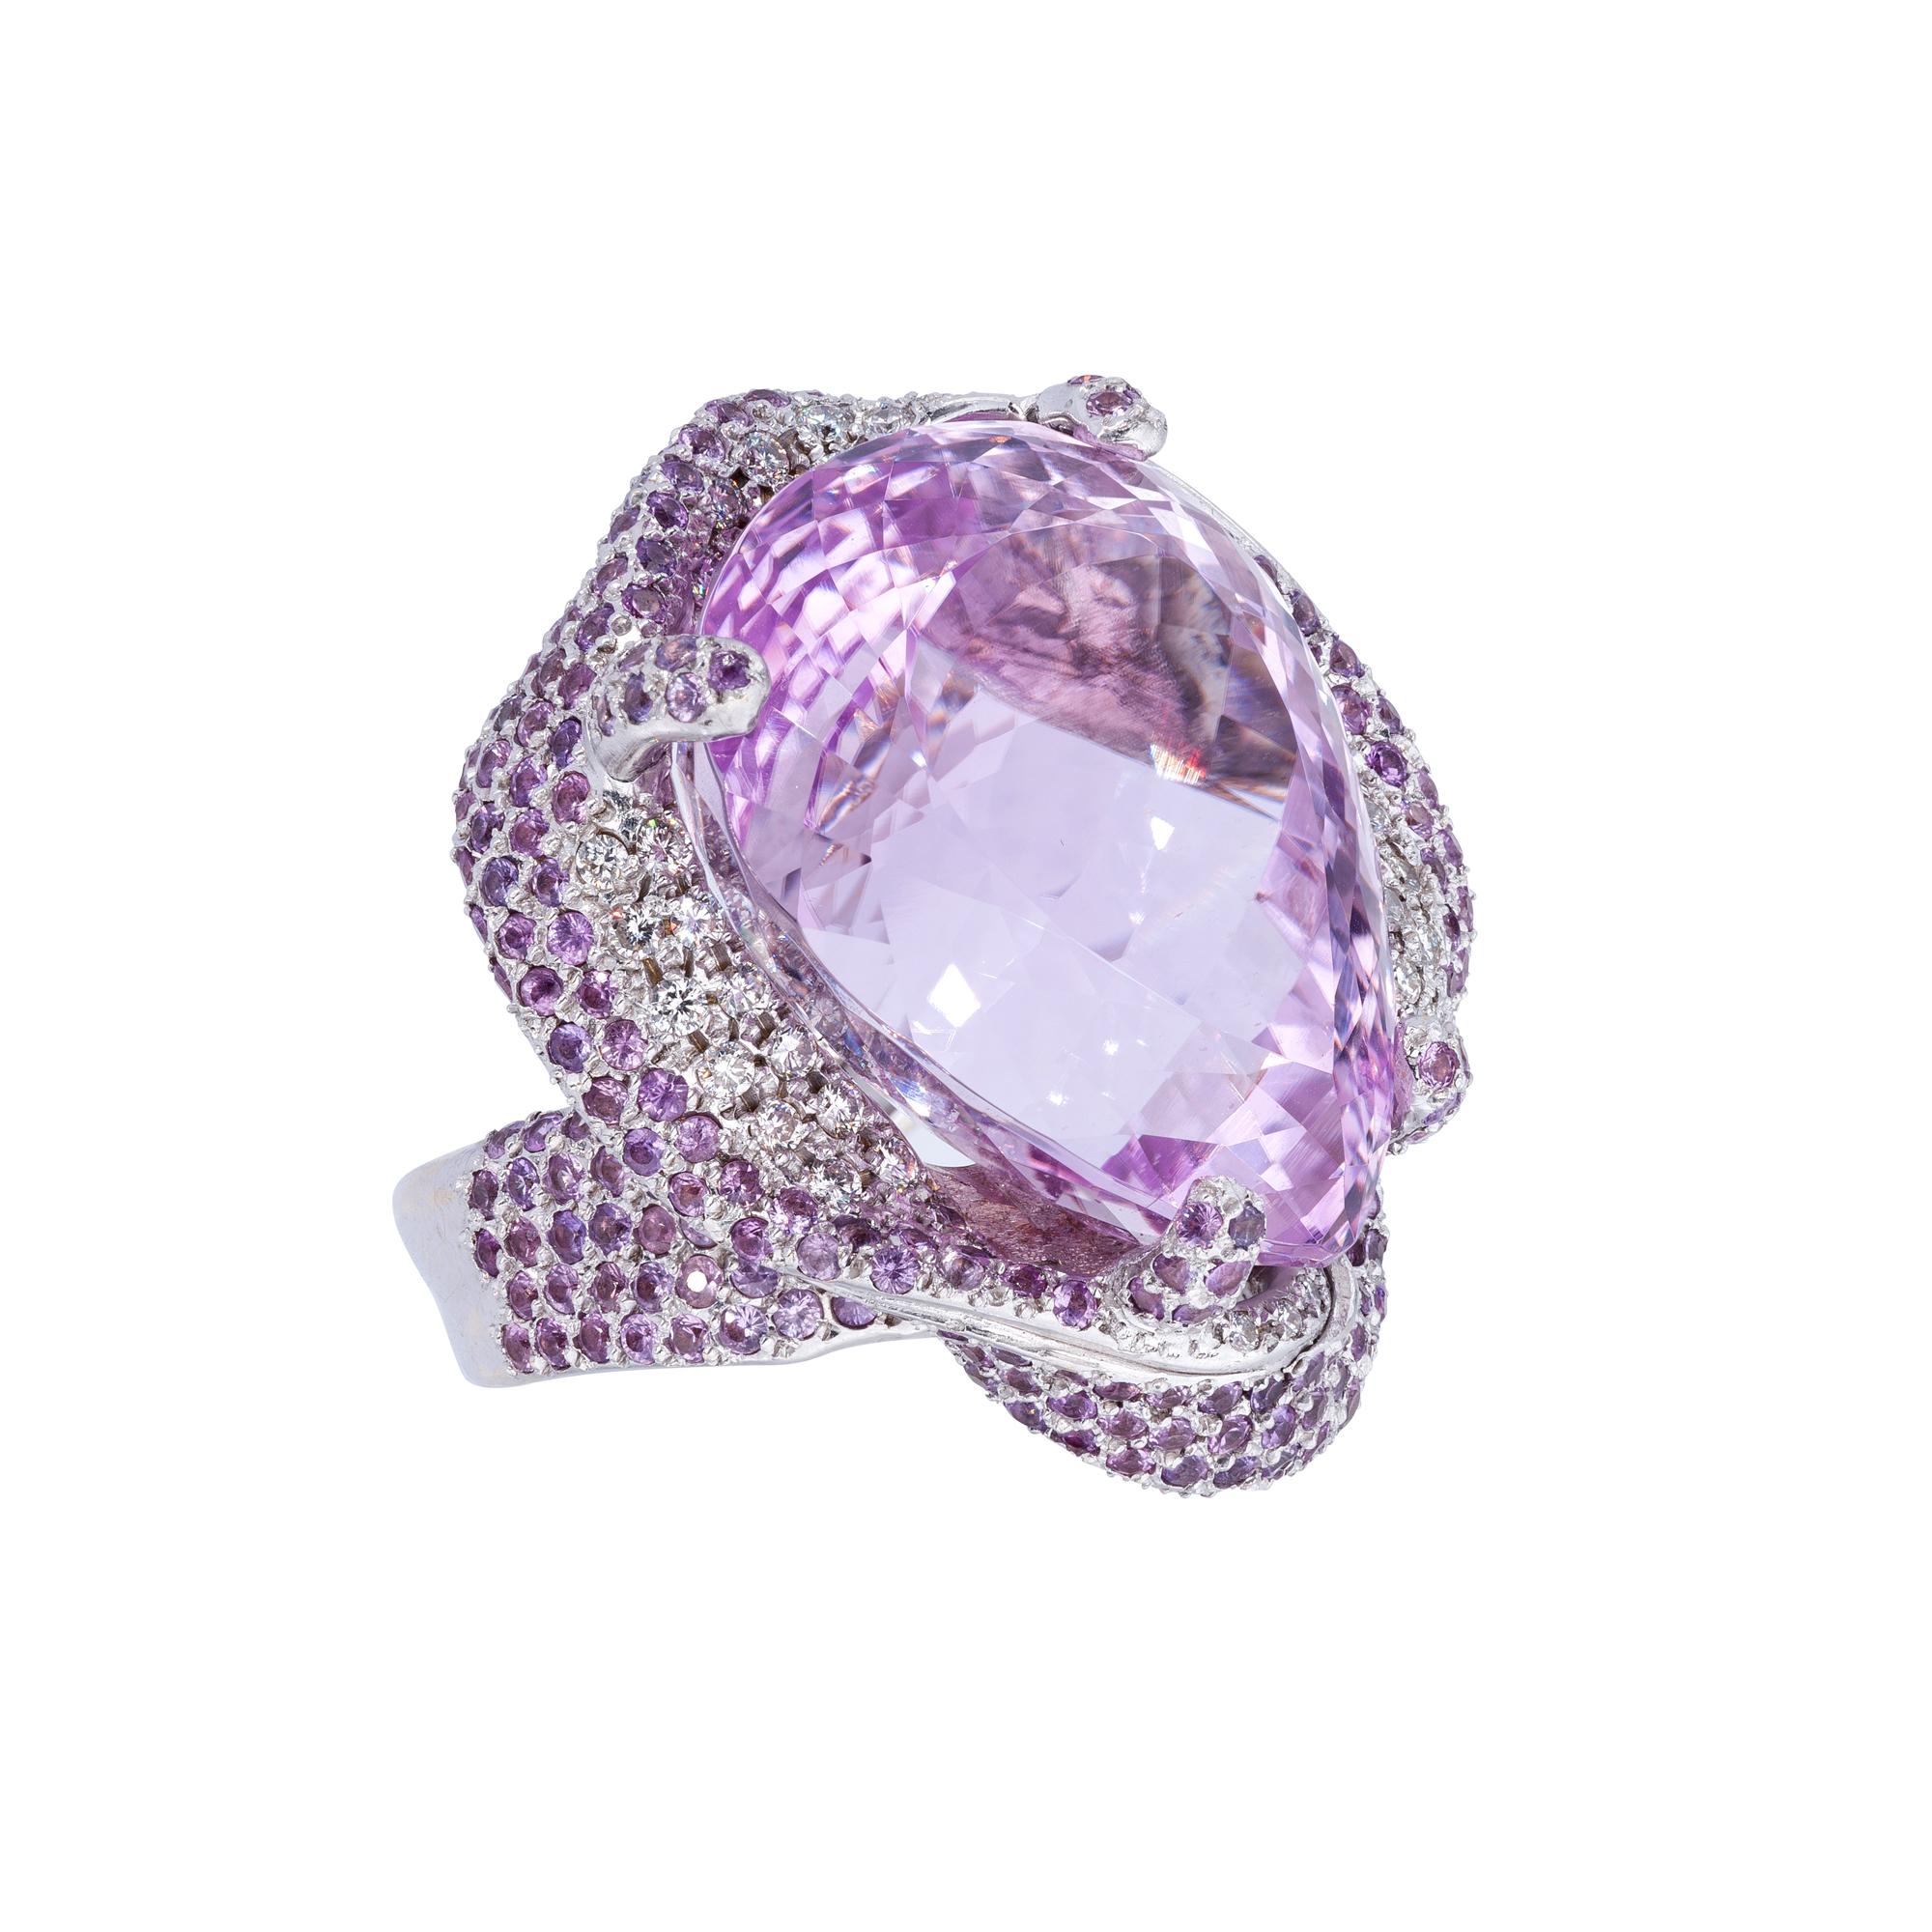 A Ring from d'Avossa Masterpiece Collection in white 18 kt gold with an outstanding Central Pear Shape Kunzite 72,62 ct (26mmx20mm) enhanced by a pavé of Pink Sapphires and White Diamonds.
Width: 29mm  Thickness: 33mm


Ref. Number AKU677

